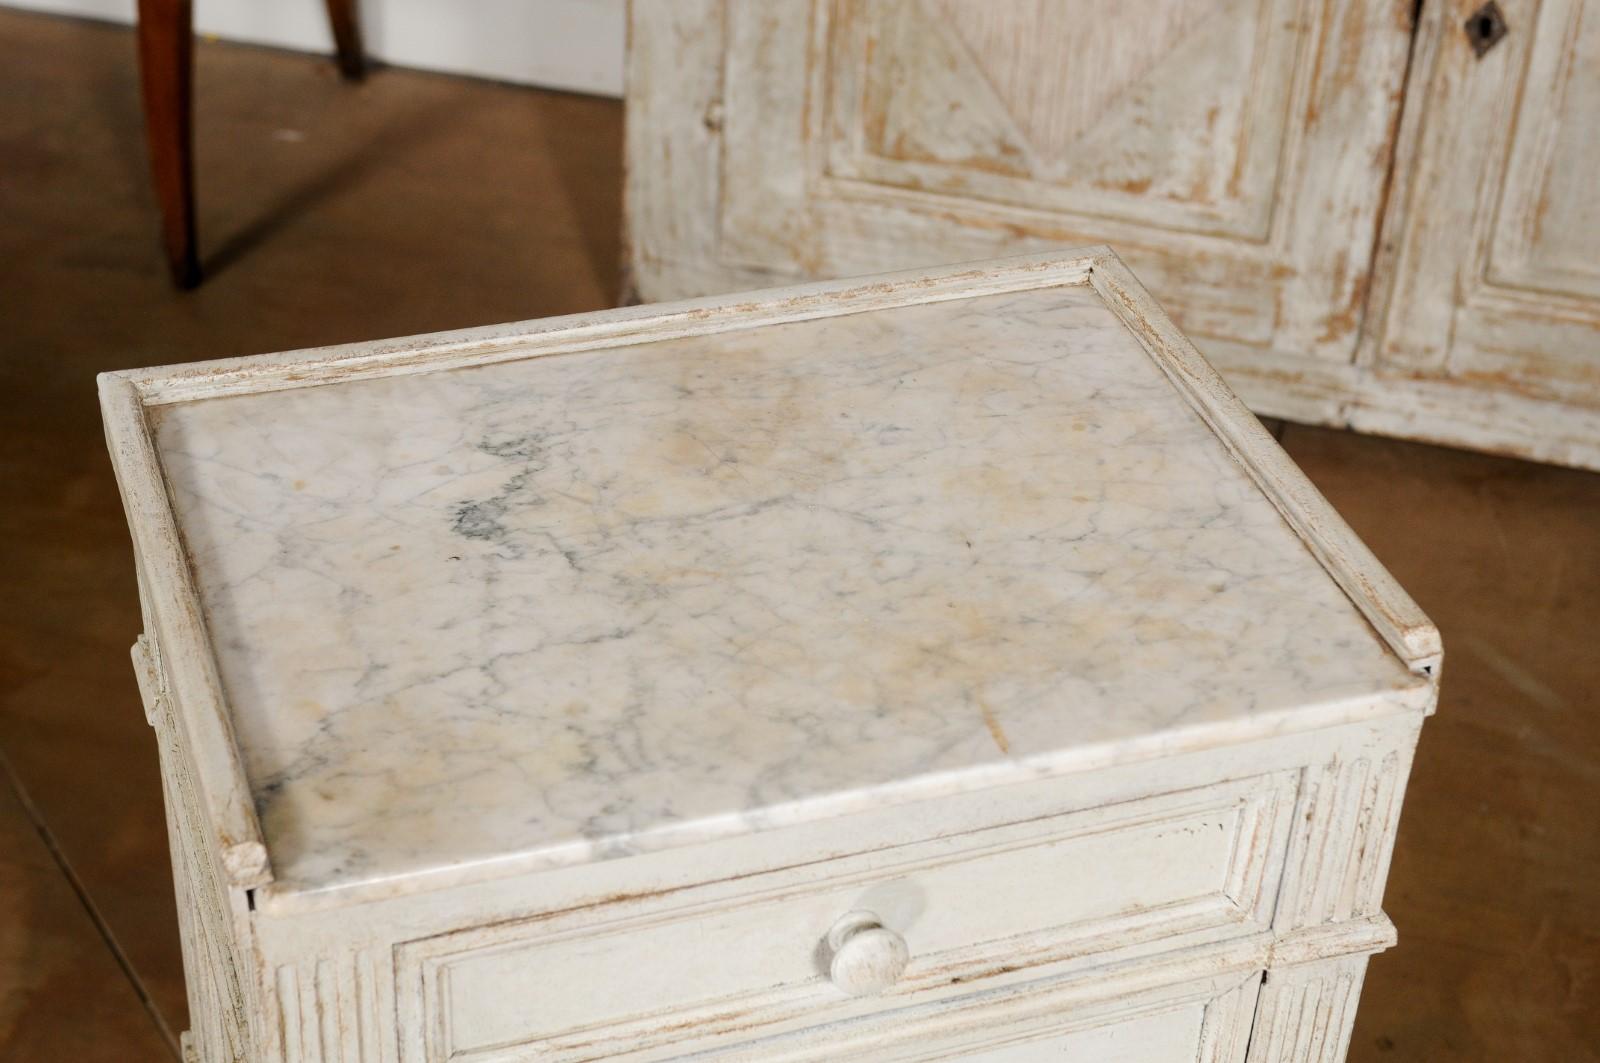 A Swedish neoclassical style painted wood nightstand table from the 19th century, with marble top, drawer, door and fluted motifs. Born in Sweden during the 19th century, this elegant bedside table features a rectangular marble top with slightly